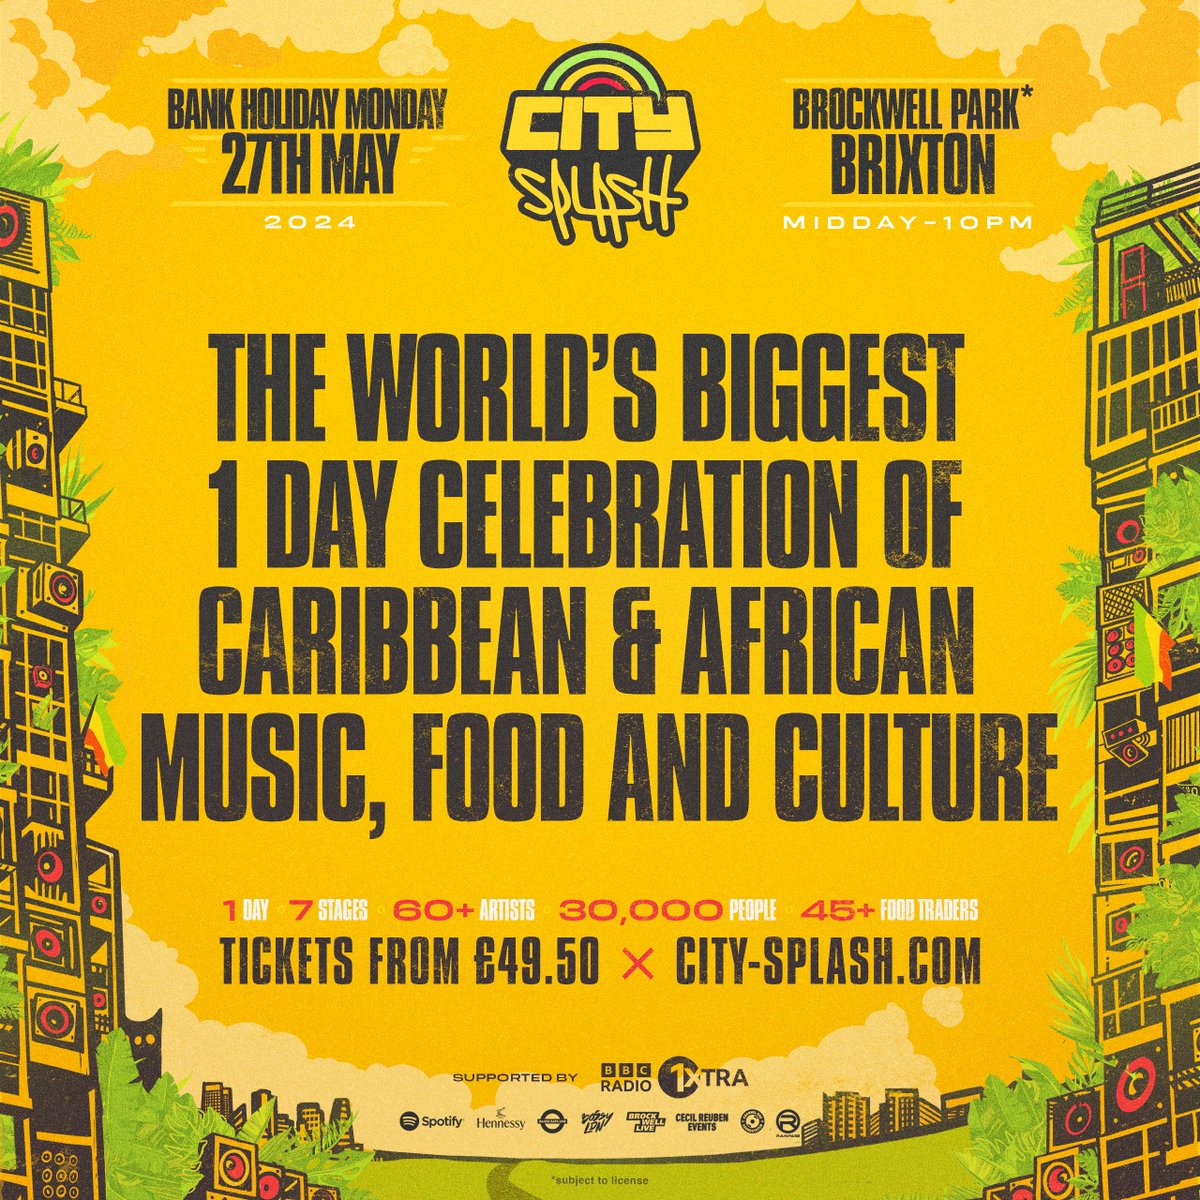 For us. By us. ❤️💛💚 #TheHomeOfCulture 🔗City Splash '24 - Tickets OUT NOW go.kaboodle.co.uk/CitySplash-2024 🗓️Bank Holiday Monday, May 27th 2024 📍Brockwell Park, Brixton